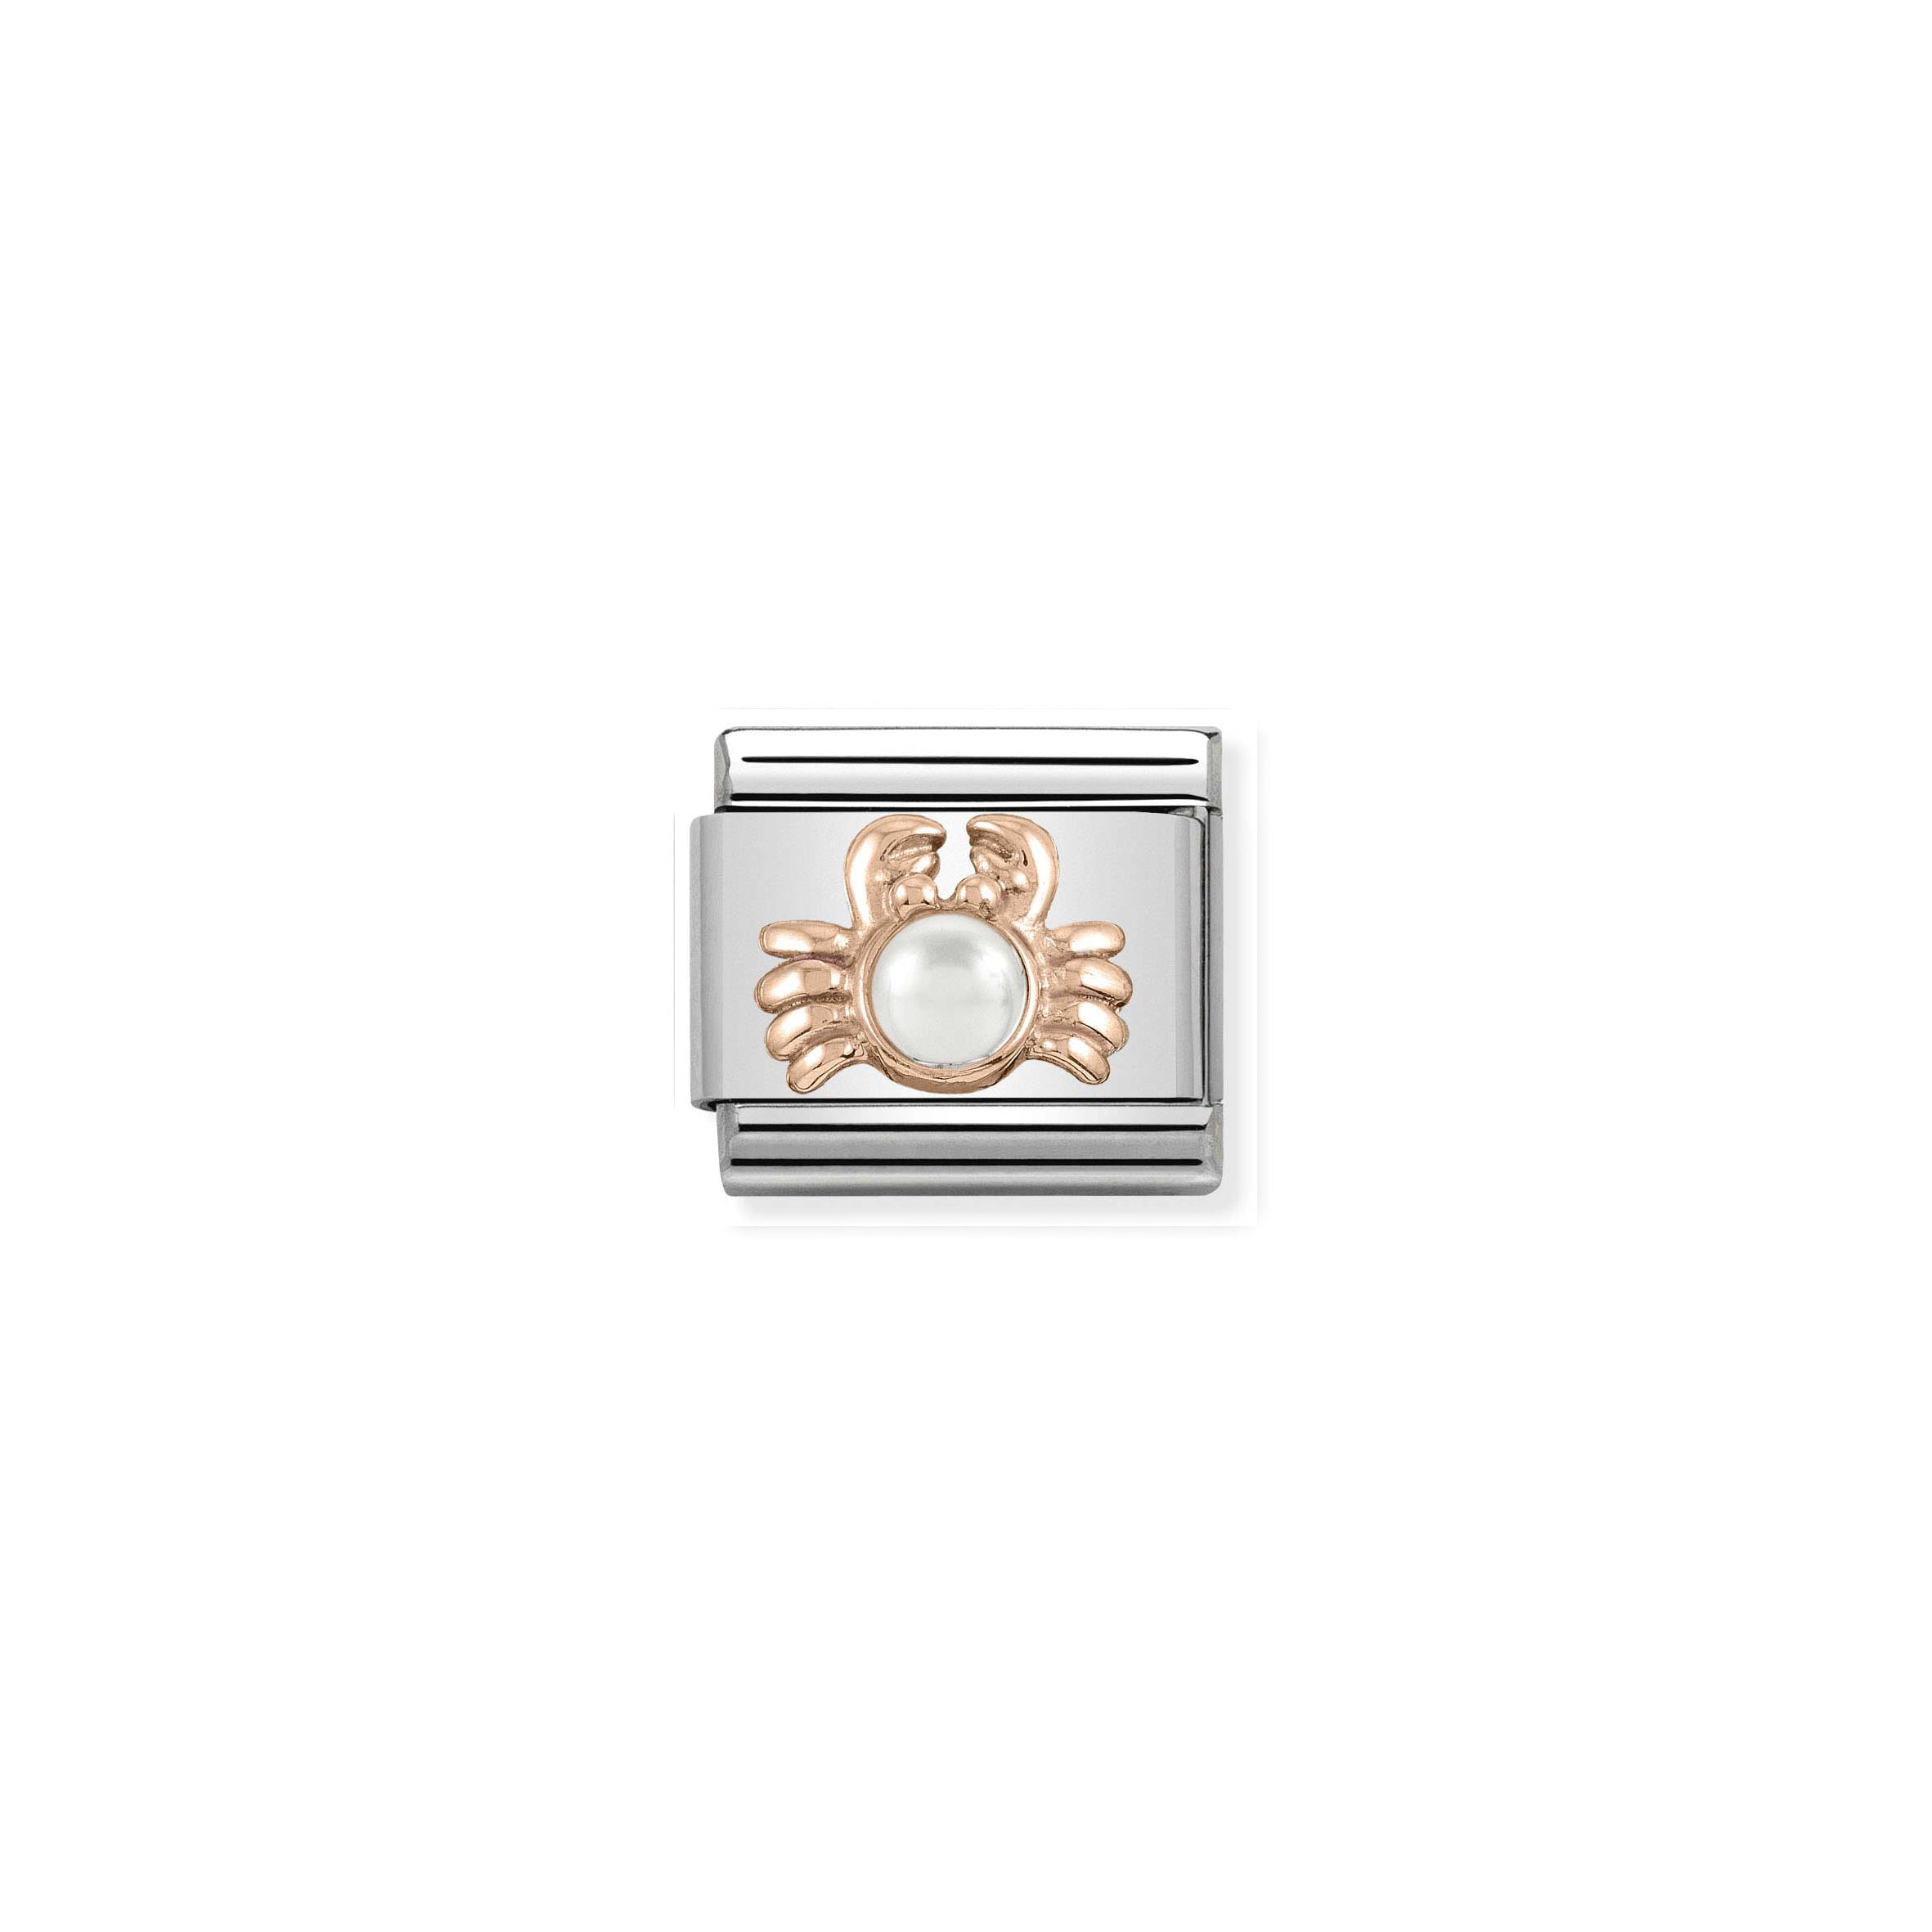 NOMINATION - Composable Classic SYMBOLS st/steel, 9ct rose gold and stone (Crab)